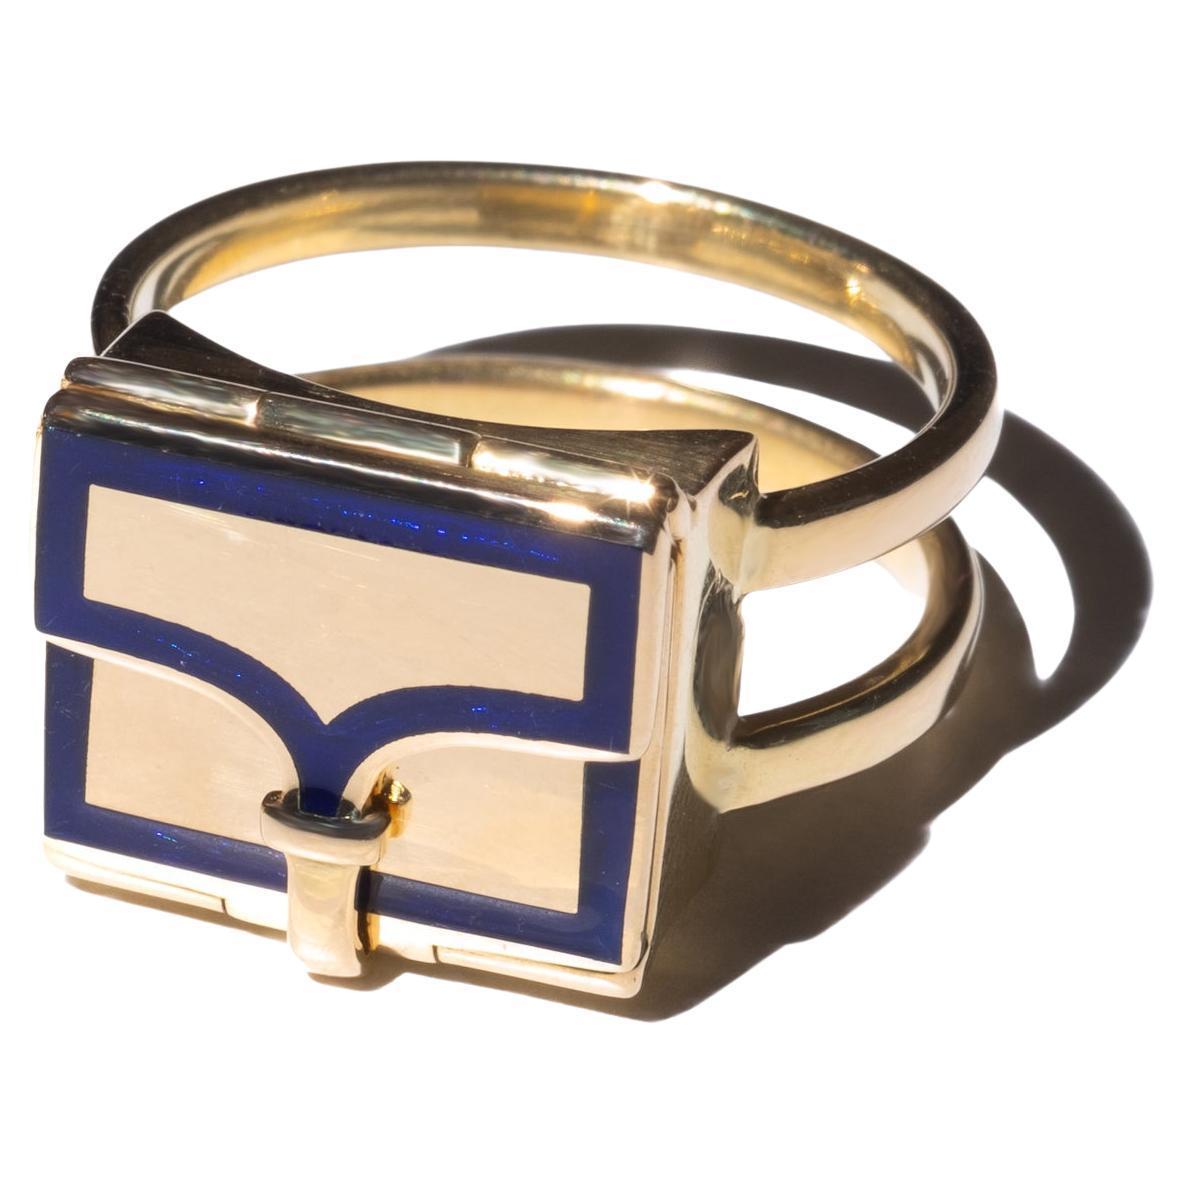 The Fleur Fairfax Book Ring in 18ct Gold and Enamel - Sapphire Blue US 6.75 For Sale